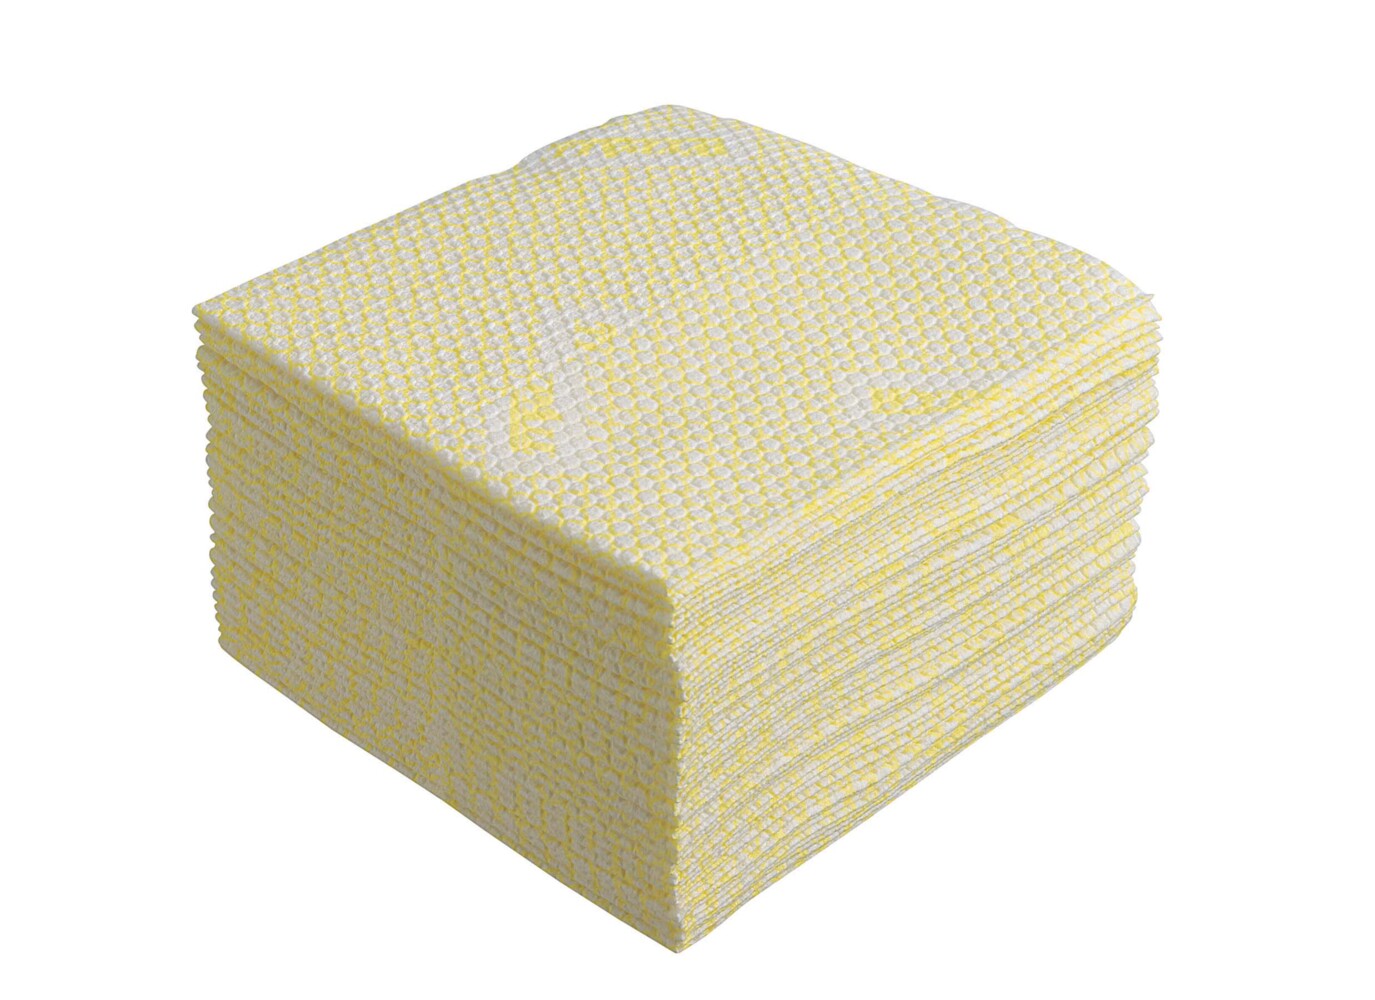 WypAll® X80 Plus Critical Clean™ Cloths 19164 - Yellow Colour Coded Cleaning Cloths - 8 Packs x 30 Quarter Fold Yellow Cloths (240 Reusable Wipes) - 19164